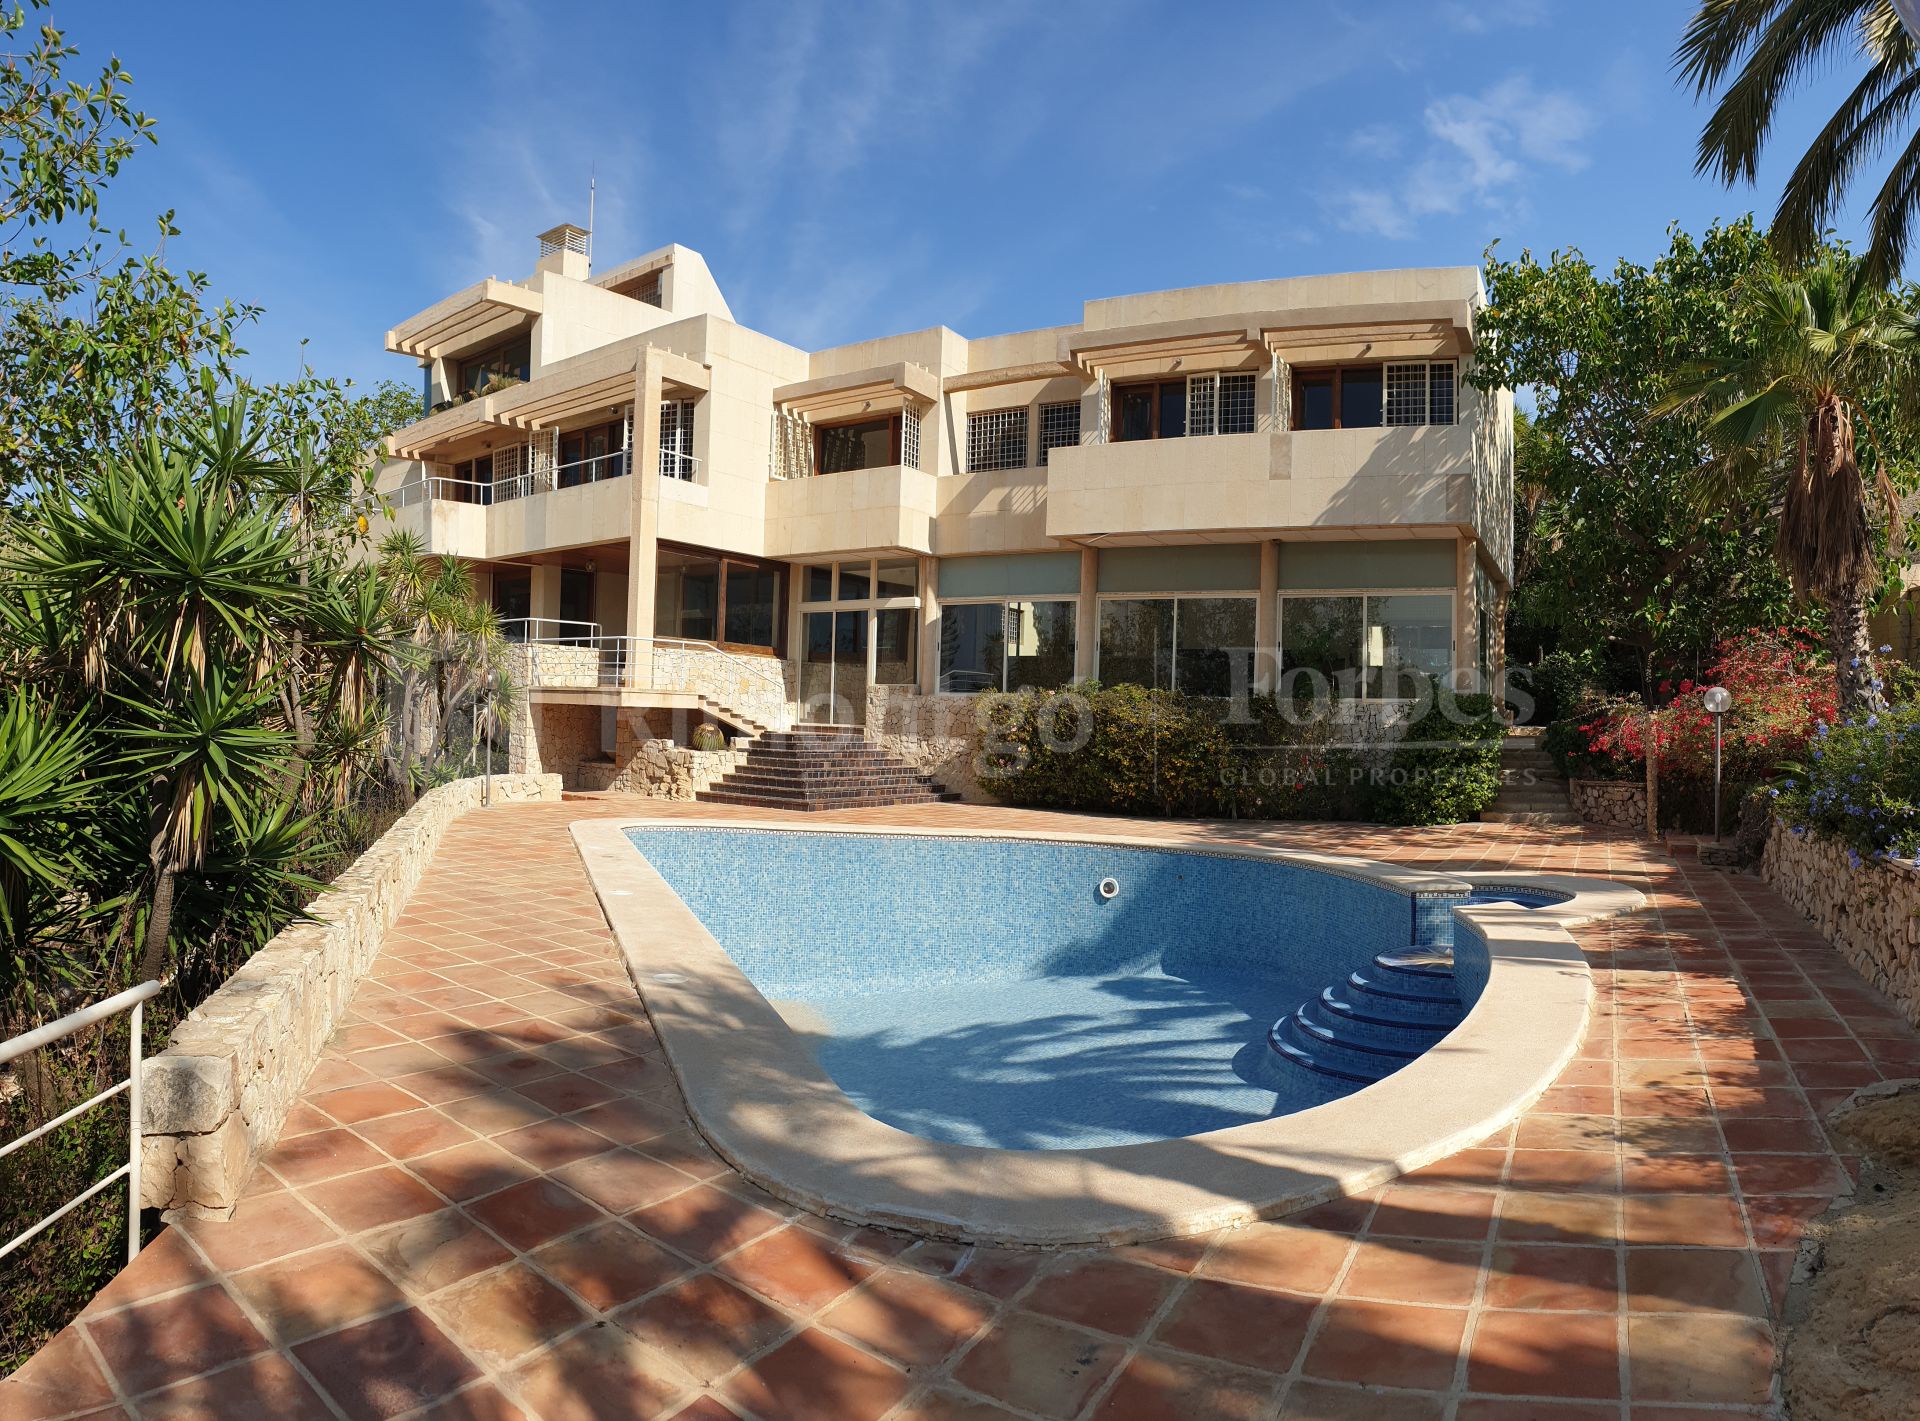 Exclusive property located on the beachfront with direct access to the sea in Cala Palmera, with lots of privacy.